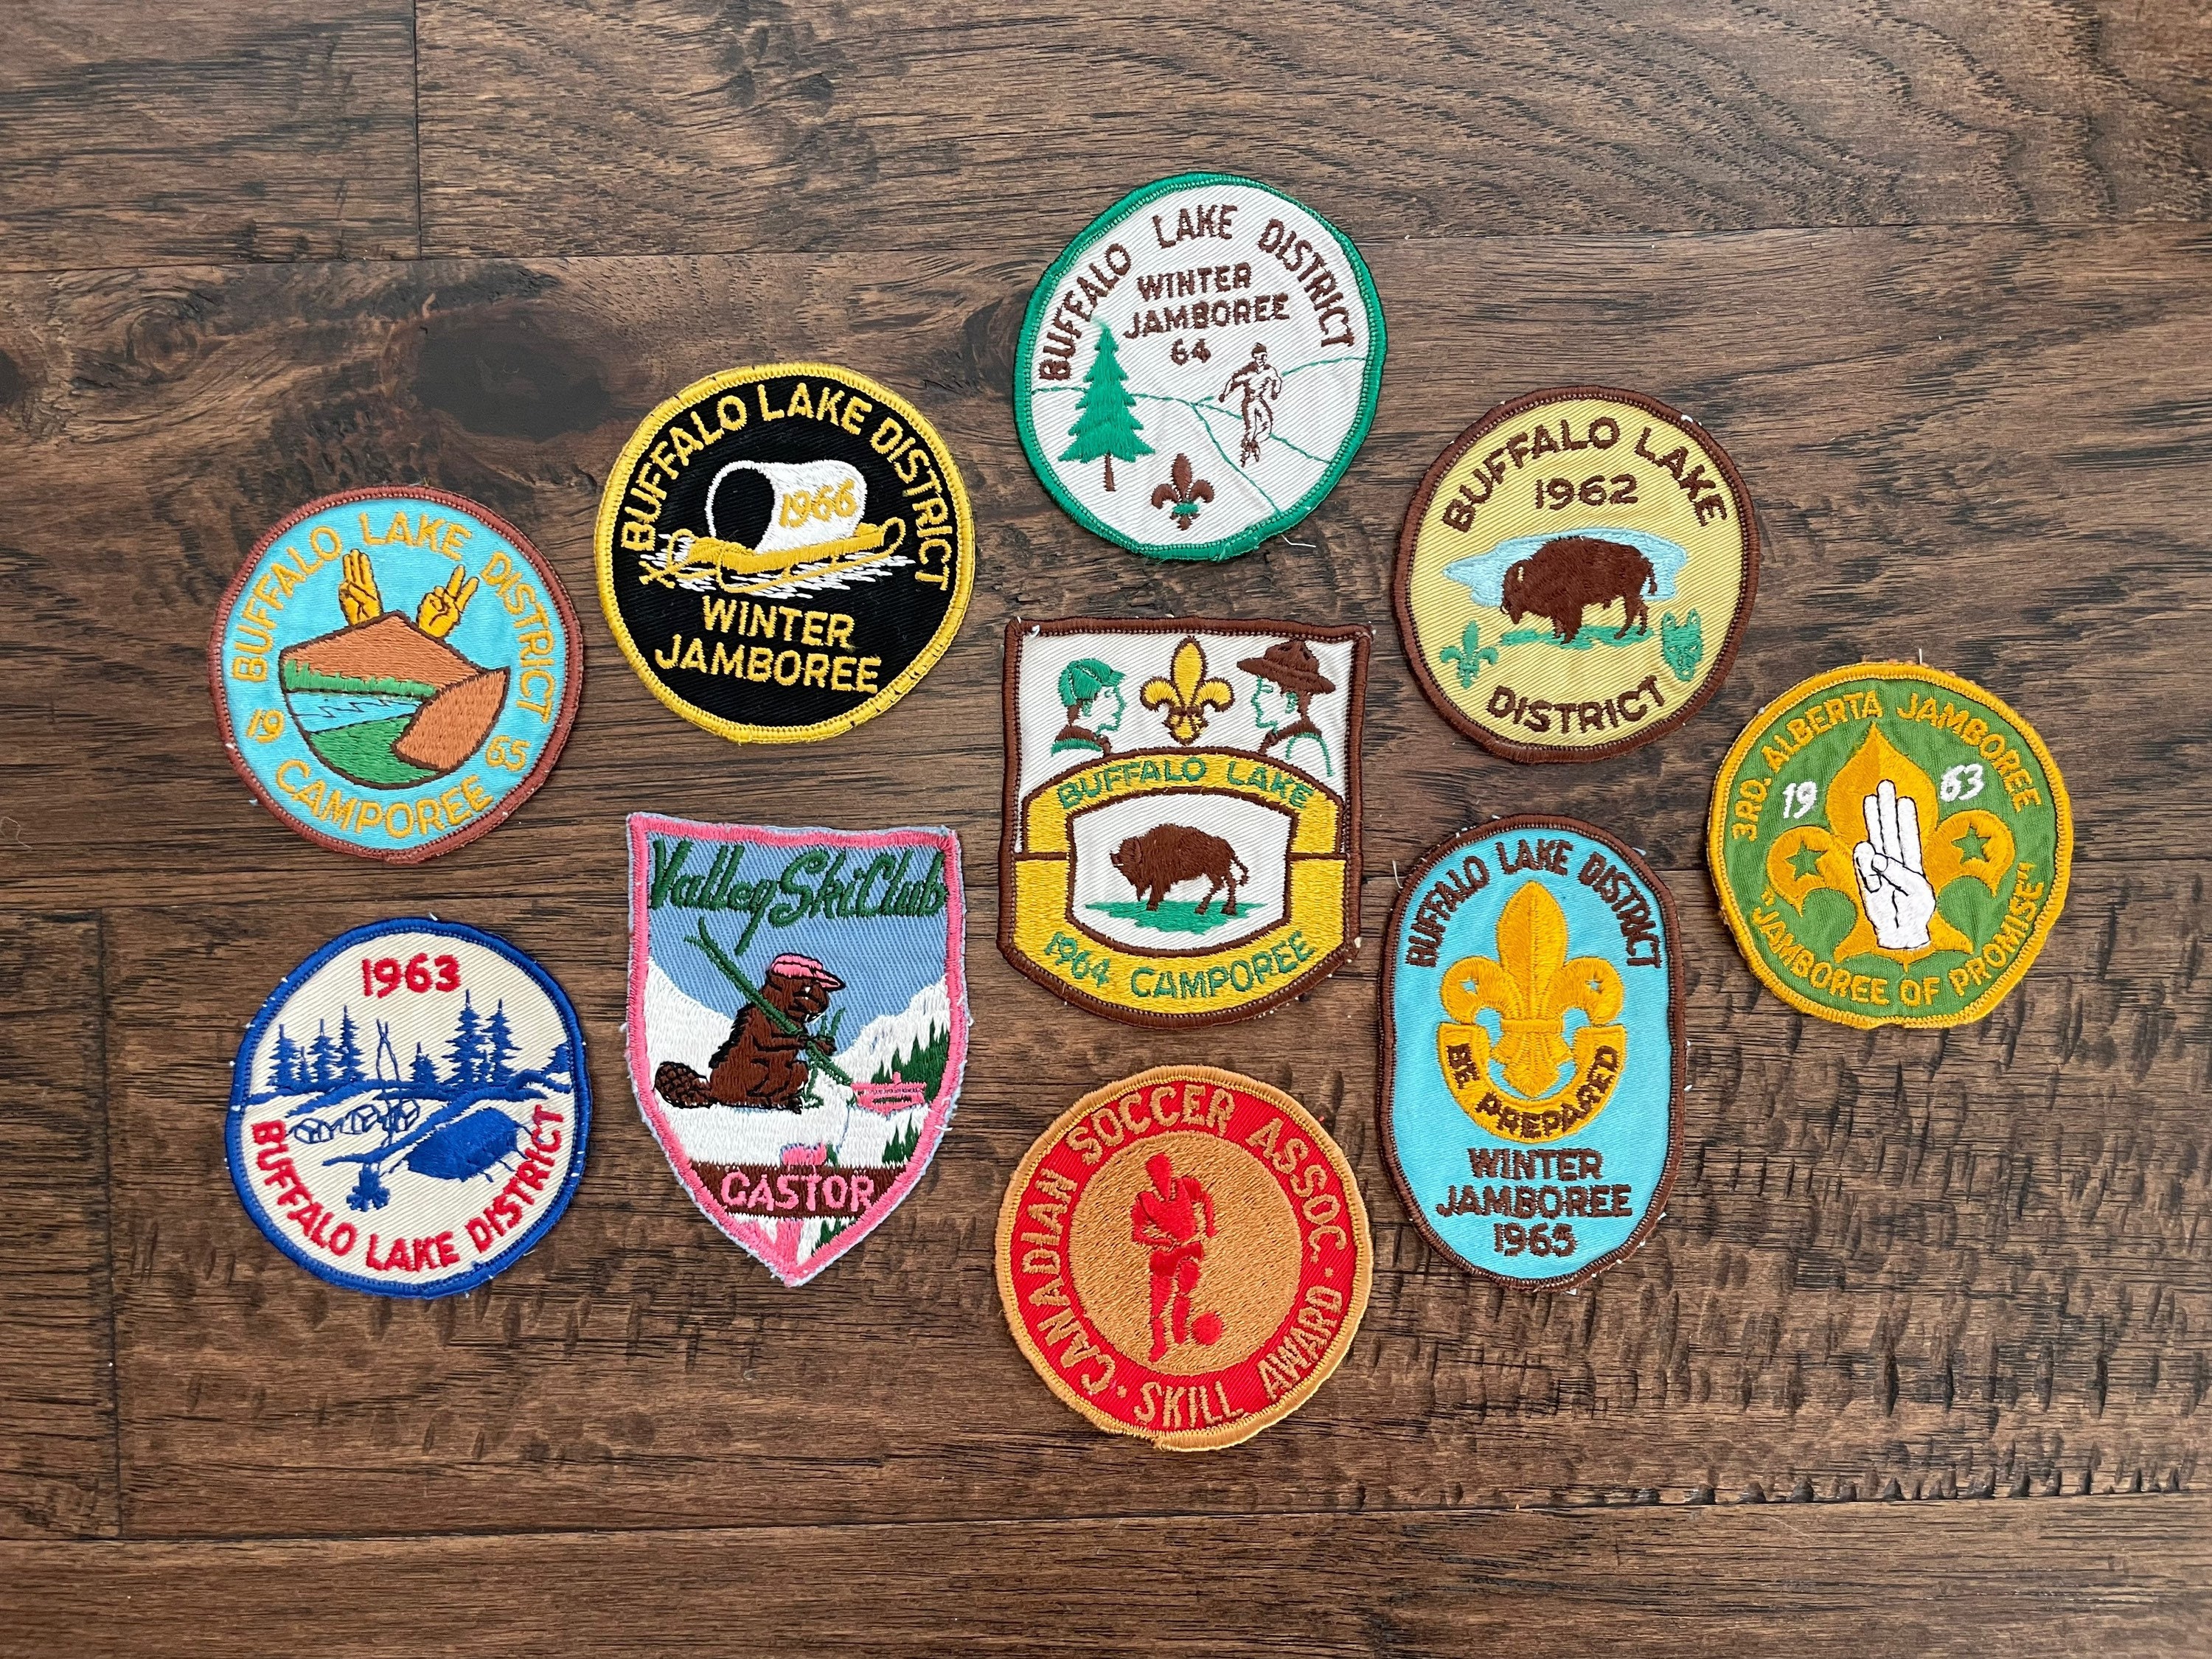 Vintage Girl Scout Boy Scout Patches 